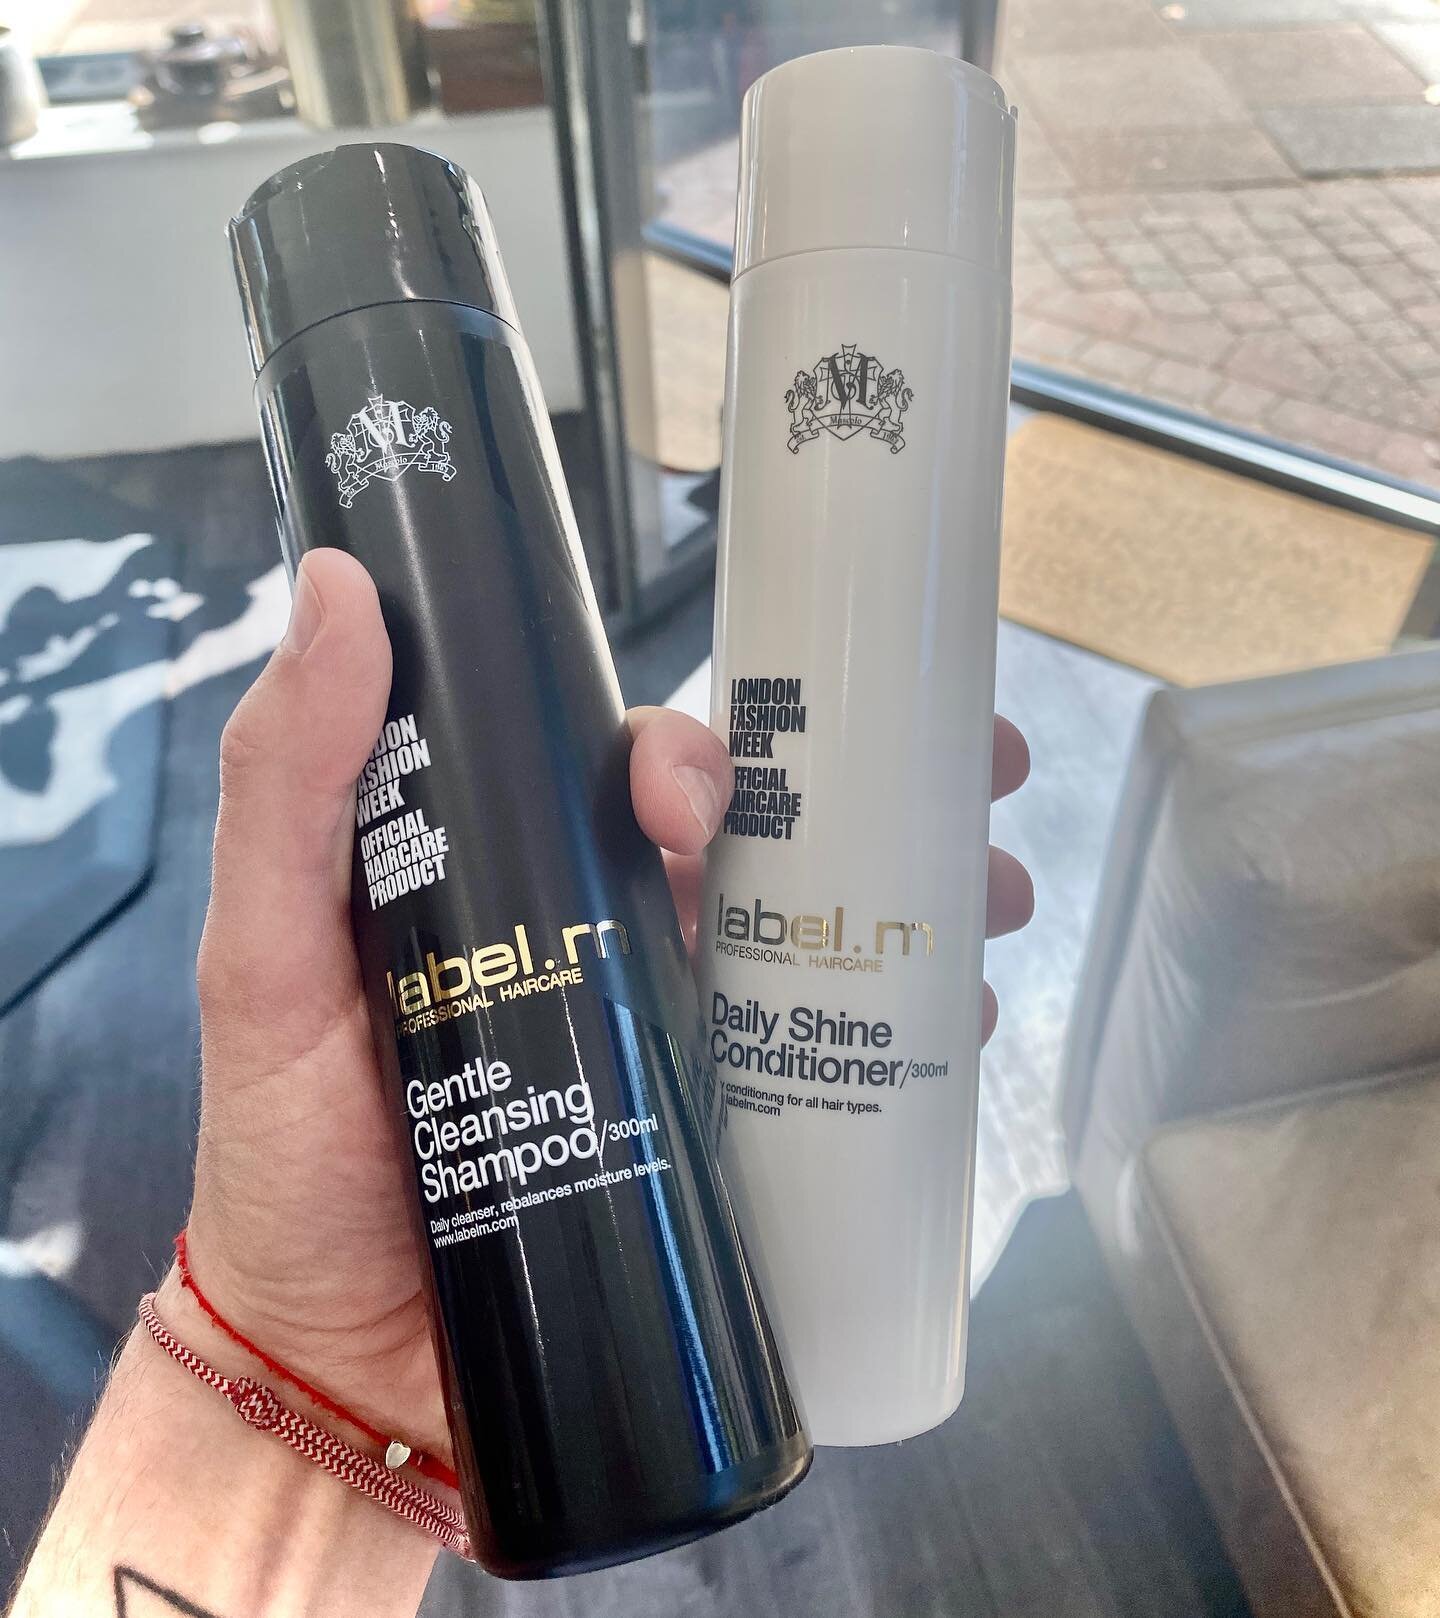 No great hair day started with out a great shampoo &amp; SEPARATE conditioner.
Stop using that all in one rubbish and up your game.
Products available to buy here from us.

#TheFellowshipBarberShop #MapleRoad #Surbiton #Surrey #Kingston #KingstonUpon